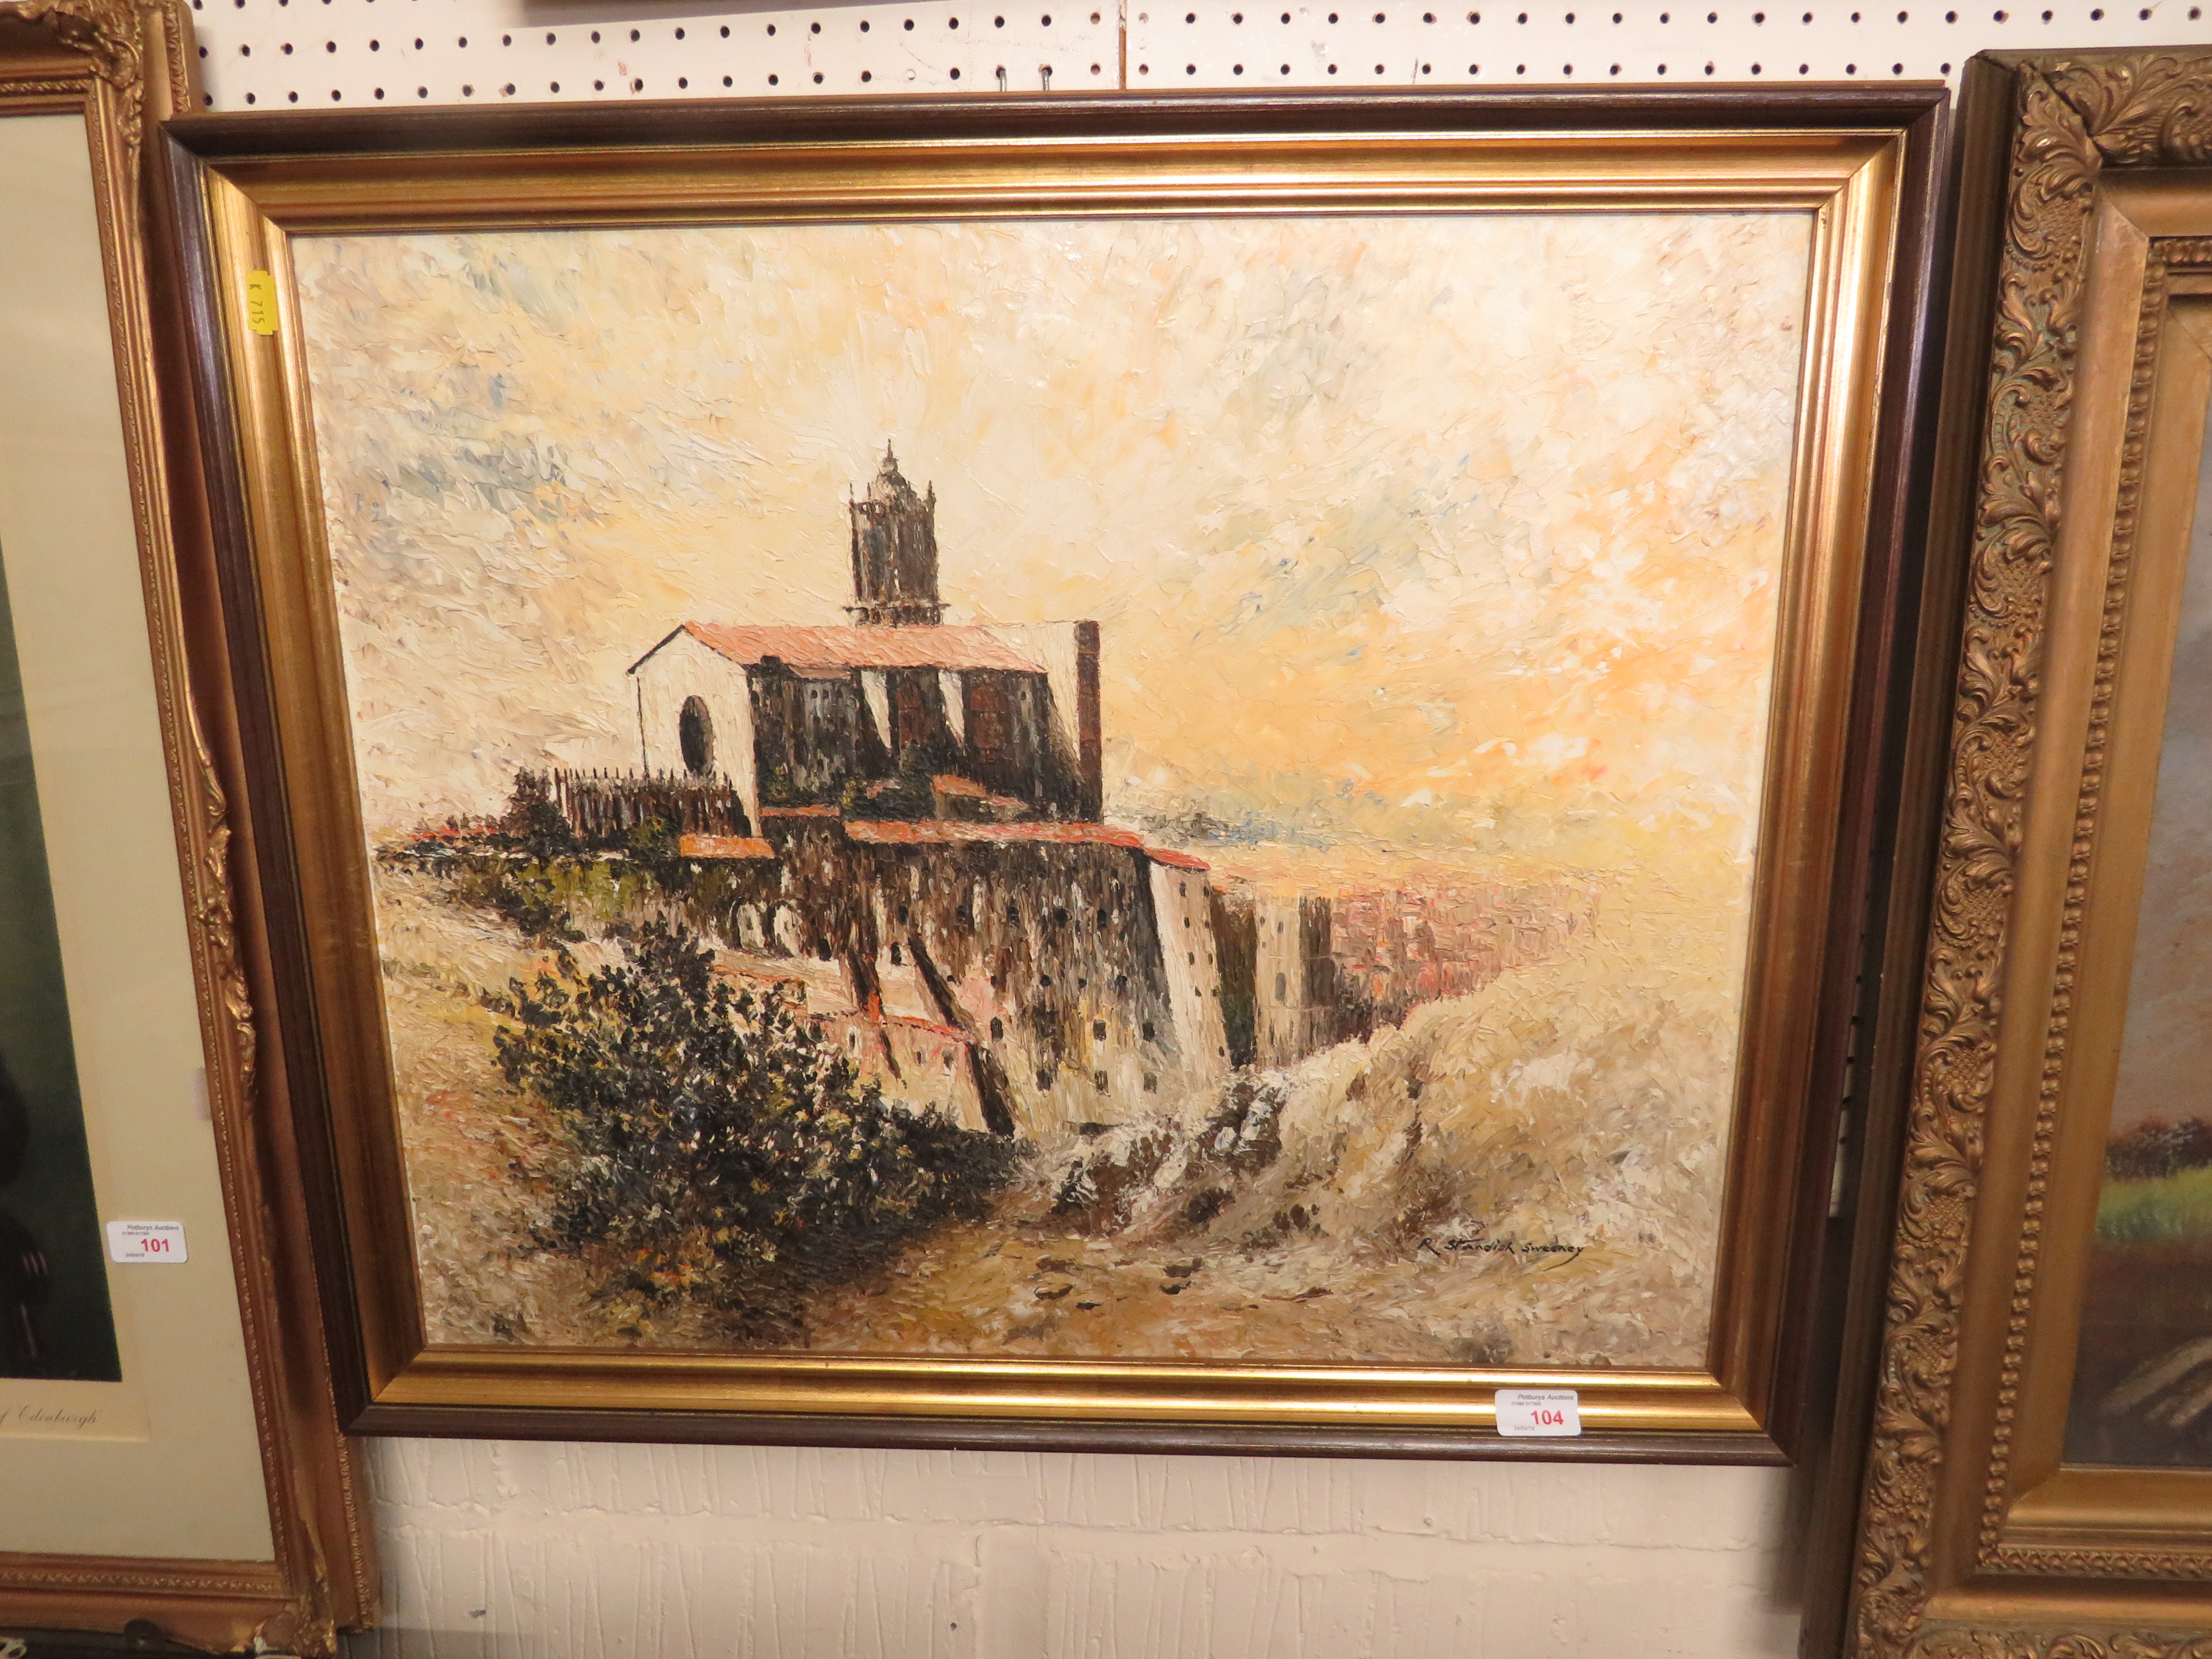 OIL ON CANVAS OF MEDITERRANEAN CHURCH SIGNED LOWER RIGHT R. STANDISH SWEENEY